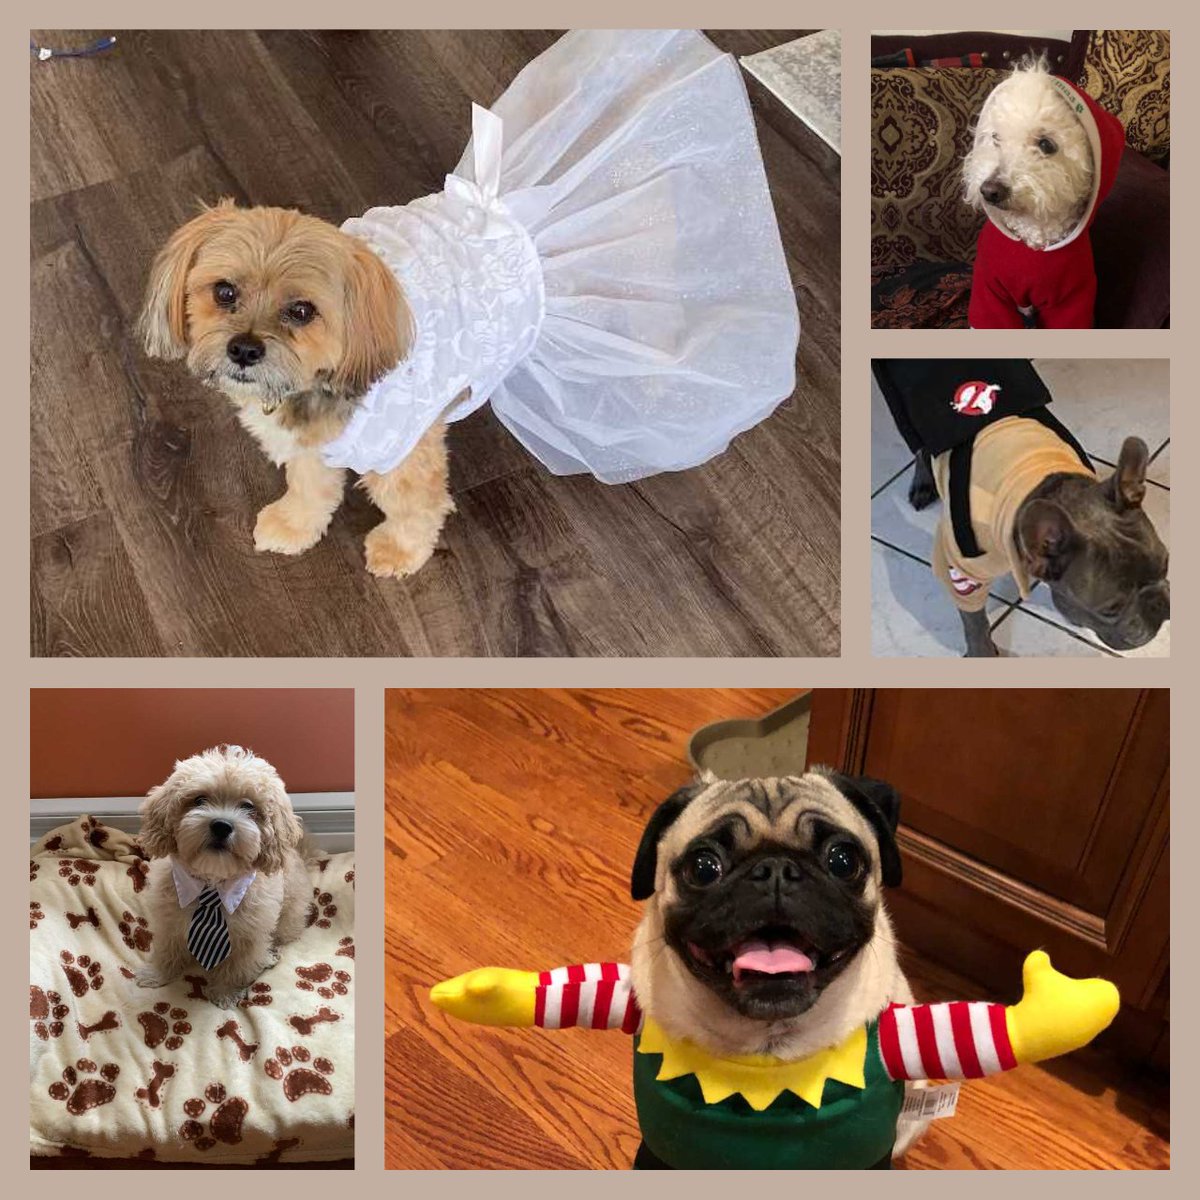 Want to smile a little extra today? Check out our team's furry friends dressed up in their most adorable outfits! We hope this made your day a little bit brighter :) #Woof! #TypicallyTogo #NationalDressUpYourPetDay